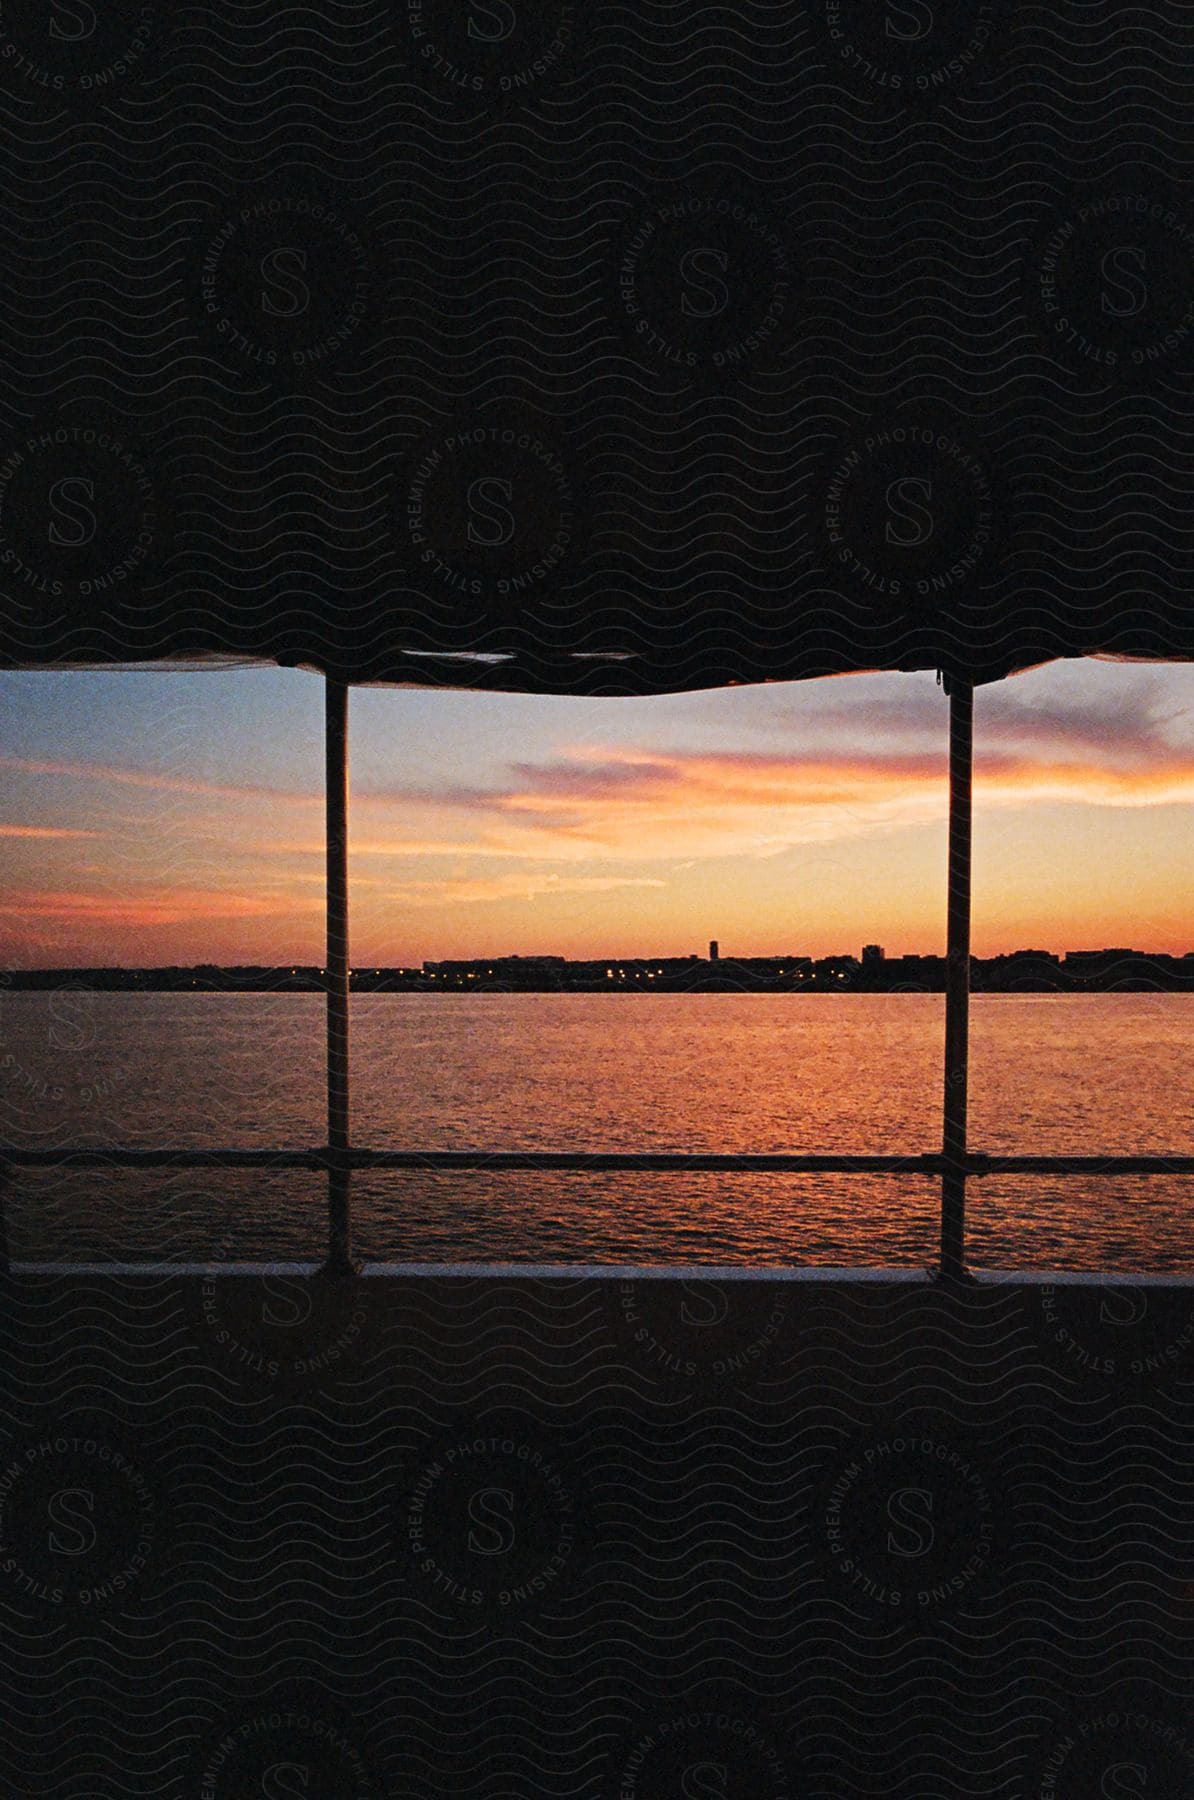 View from inside a boat with the sea landscape on a red sky day